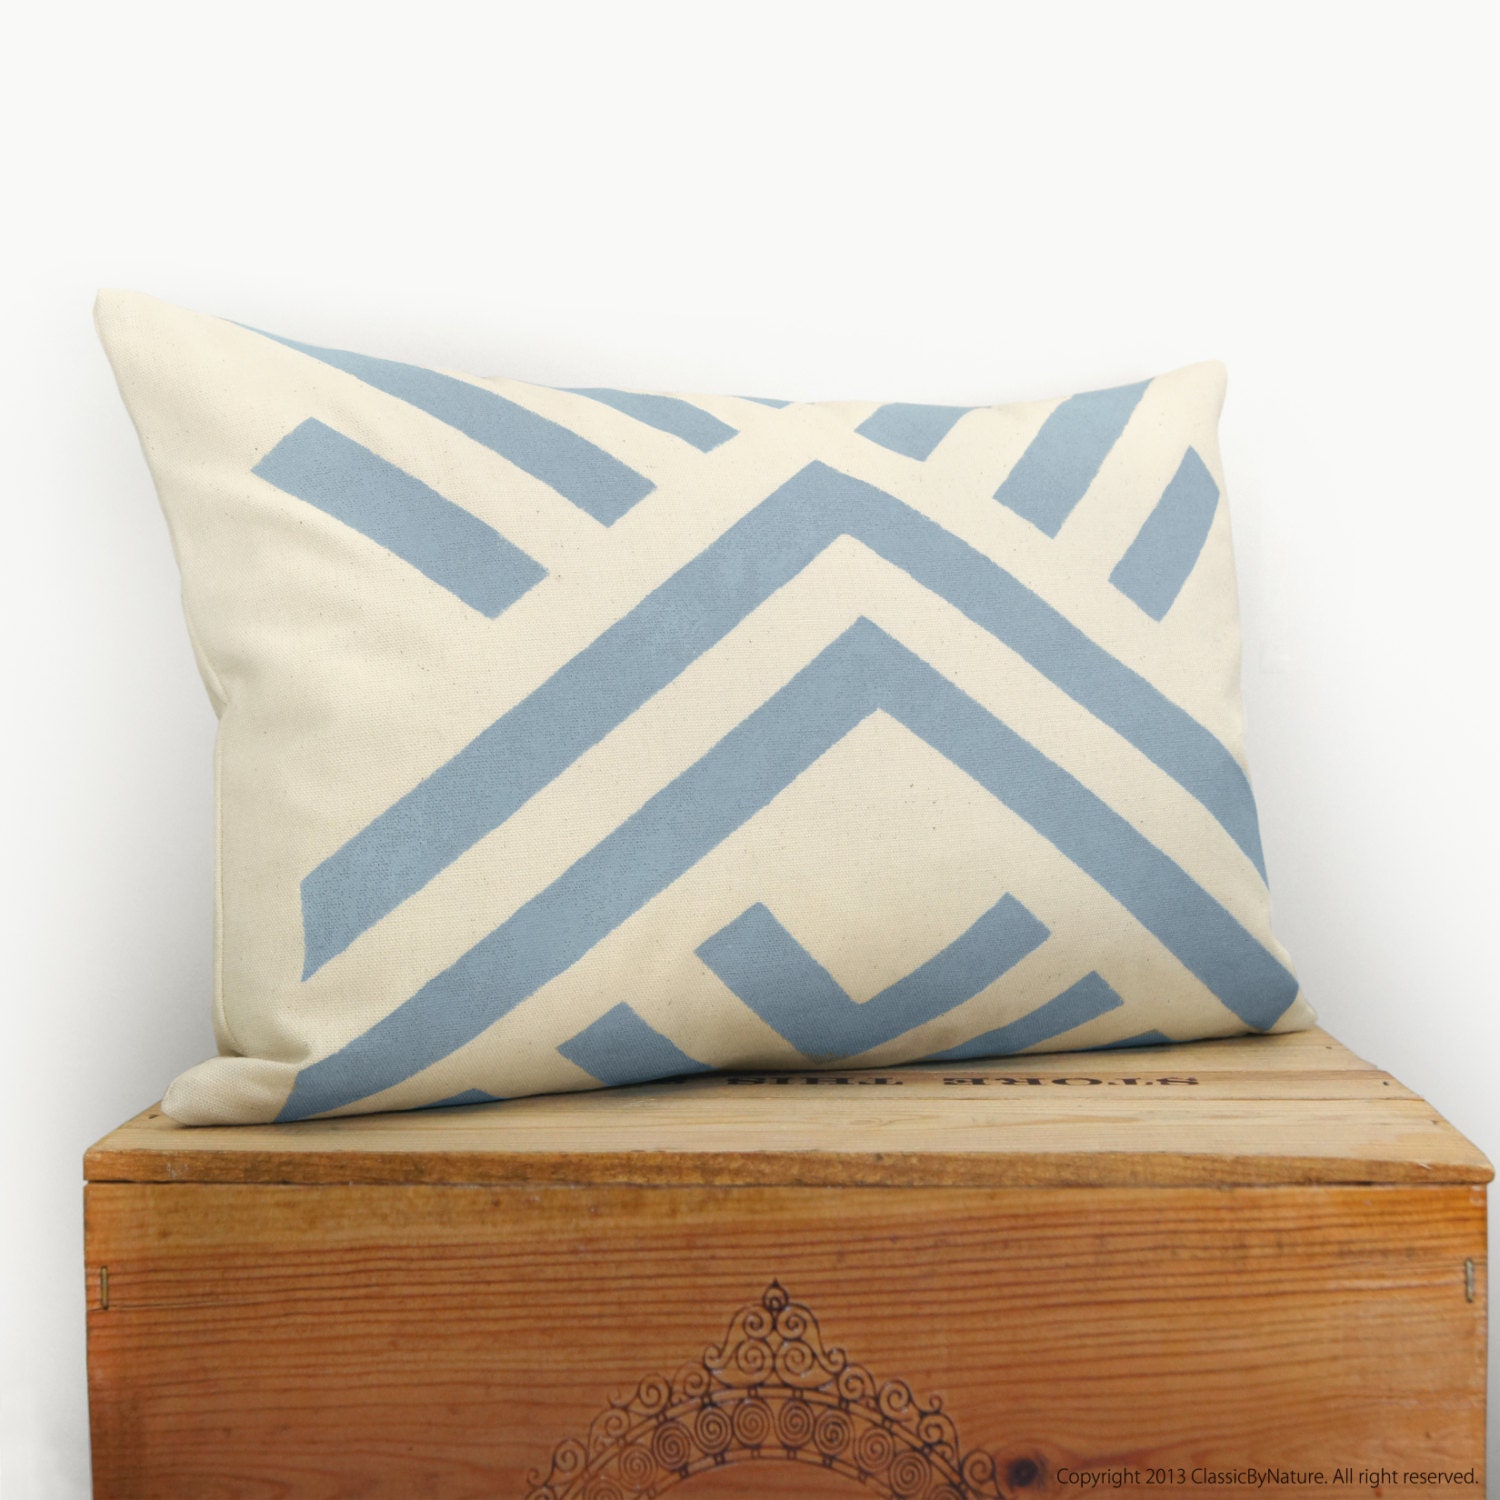 Chevron pillow - Throw pillow covers - Hand printed pillow in  dusk blue and cream with geometric design - 12x18 lumbar pillow cover - ClassicByNature